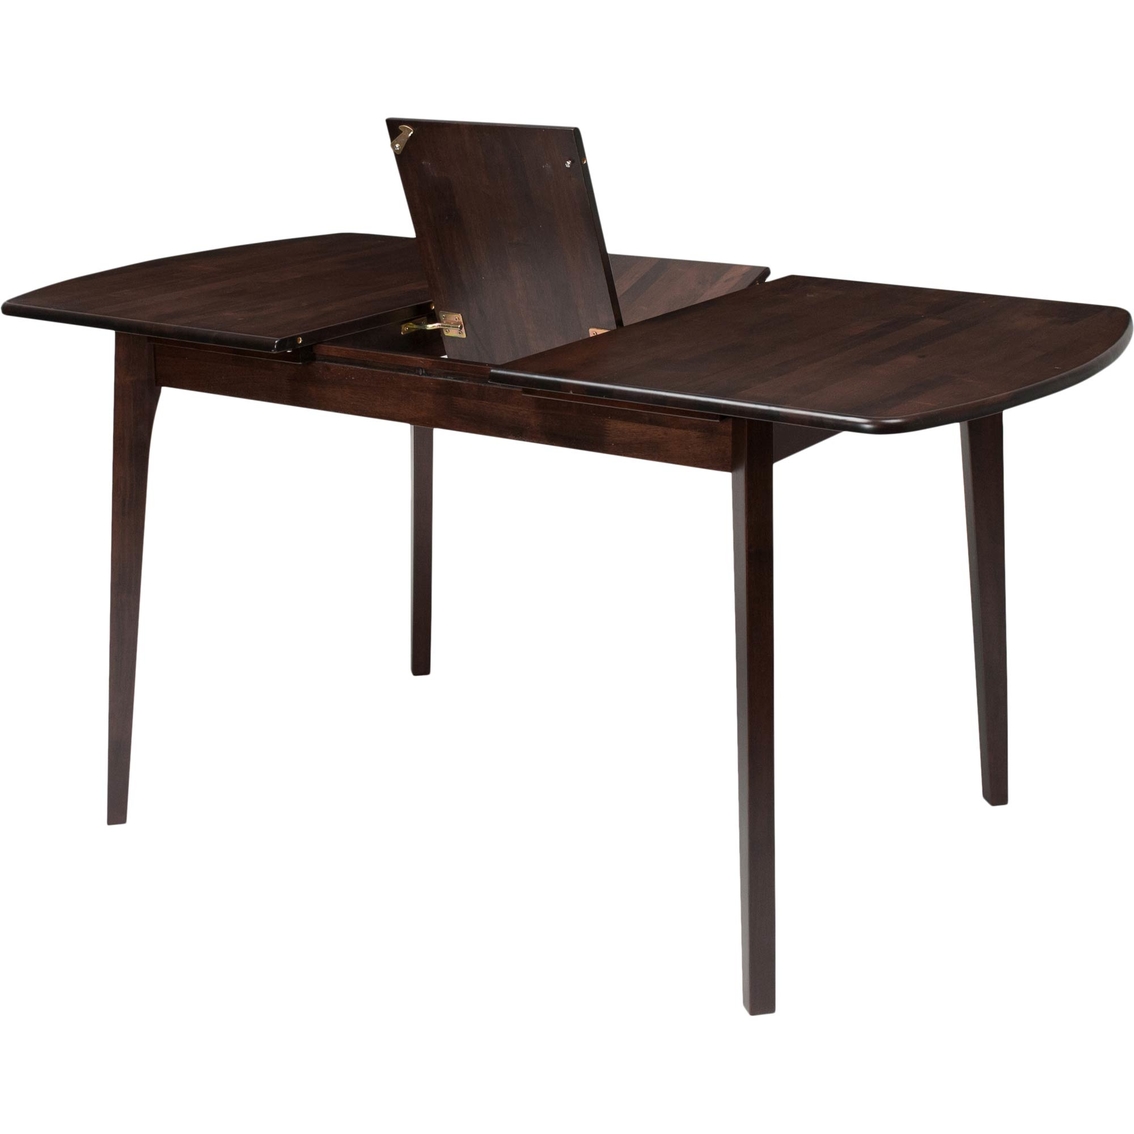 CorLiving Dillon Extendable Oblong Dining Table with 12 in. Butterfly Leaf - Image 3 of 4